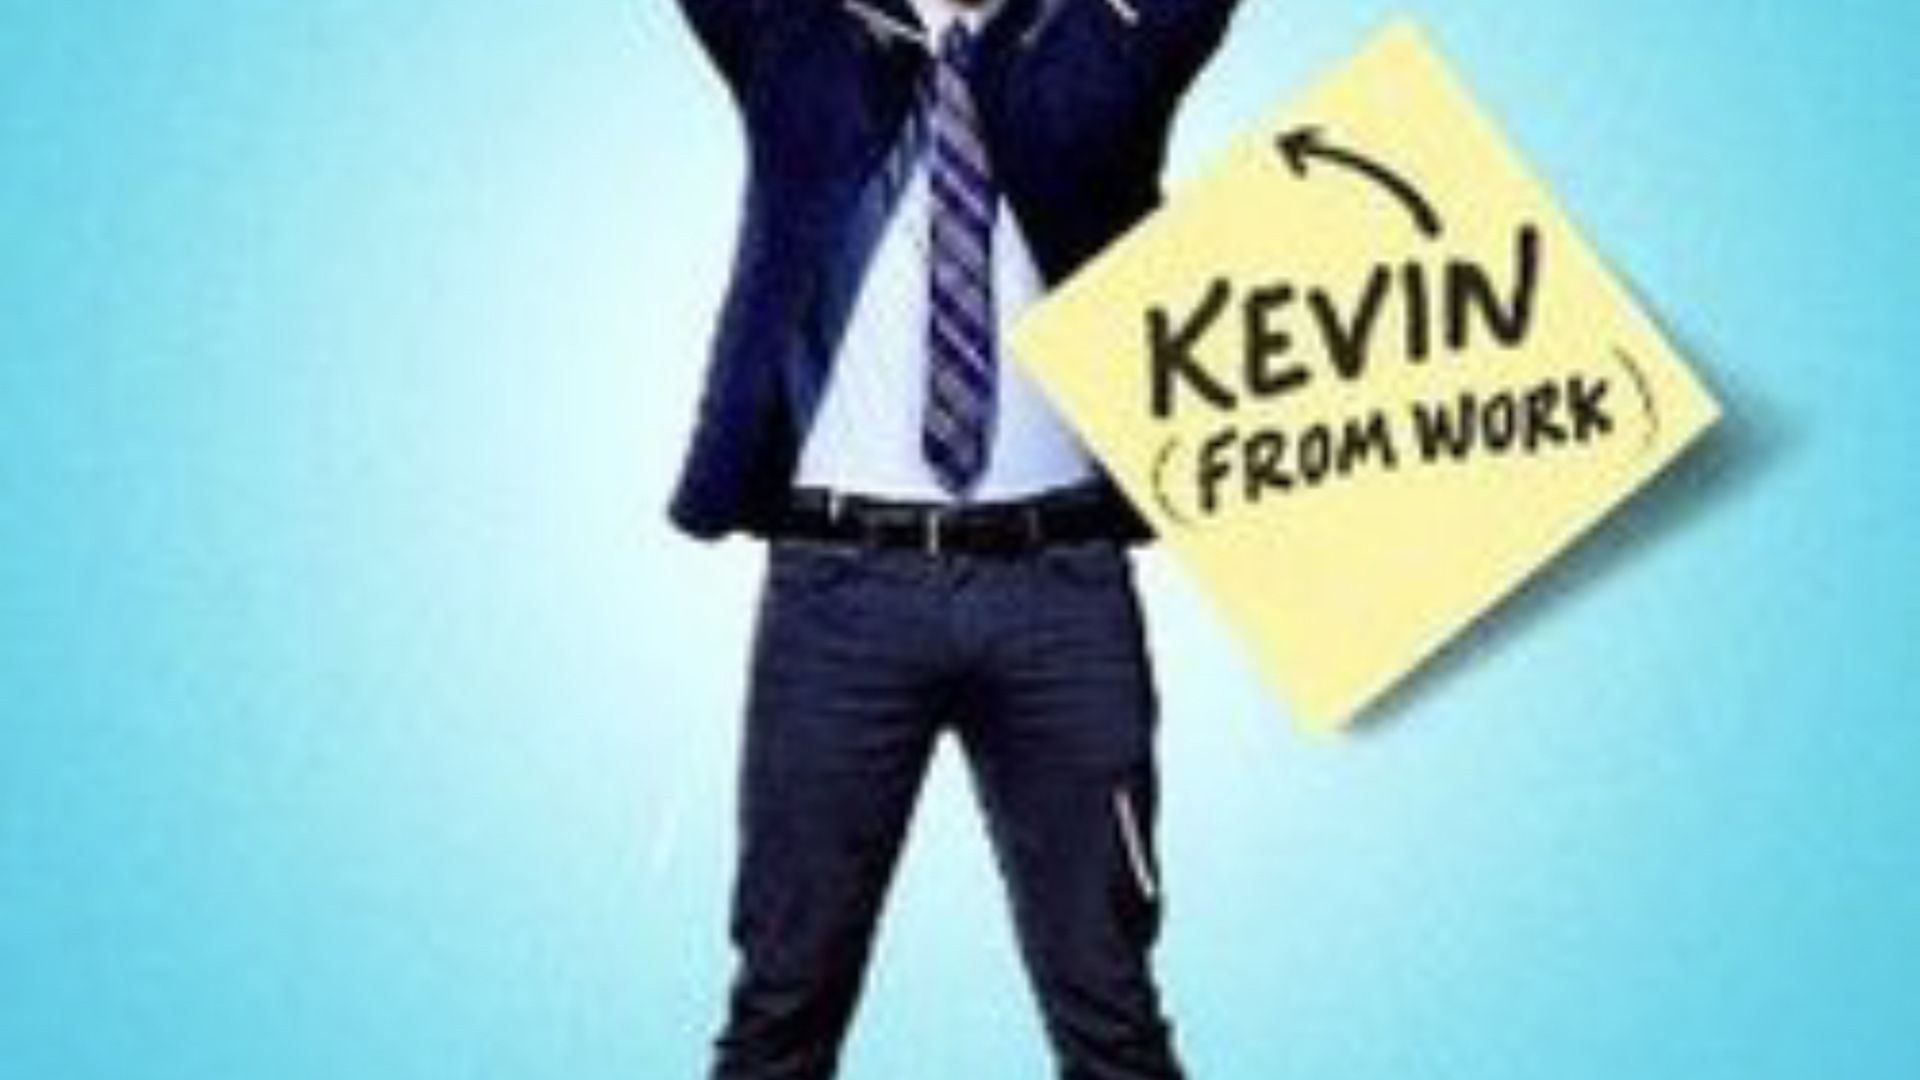 Kevin from Work background